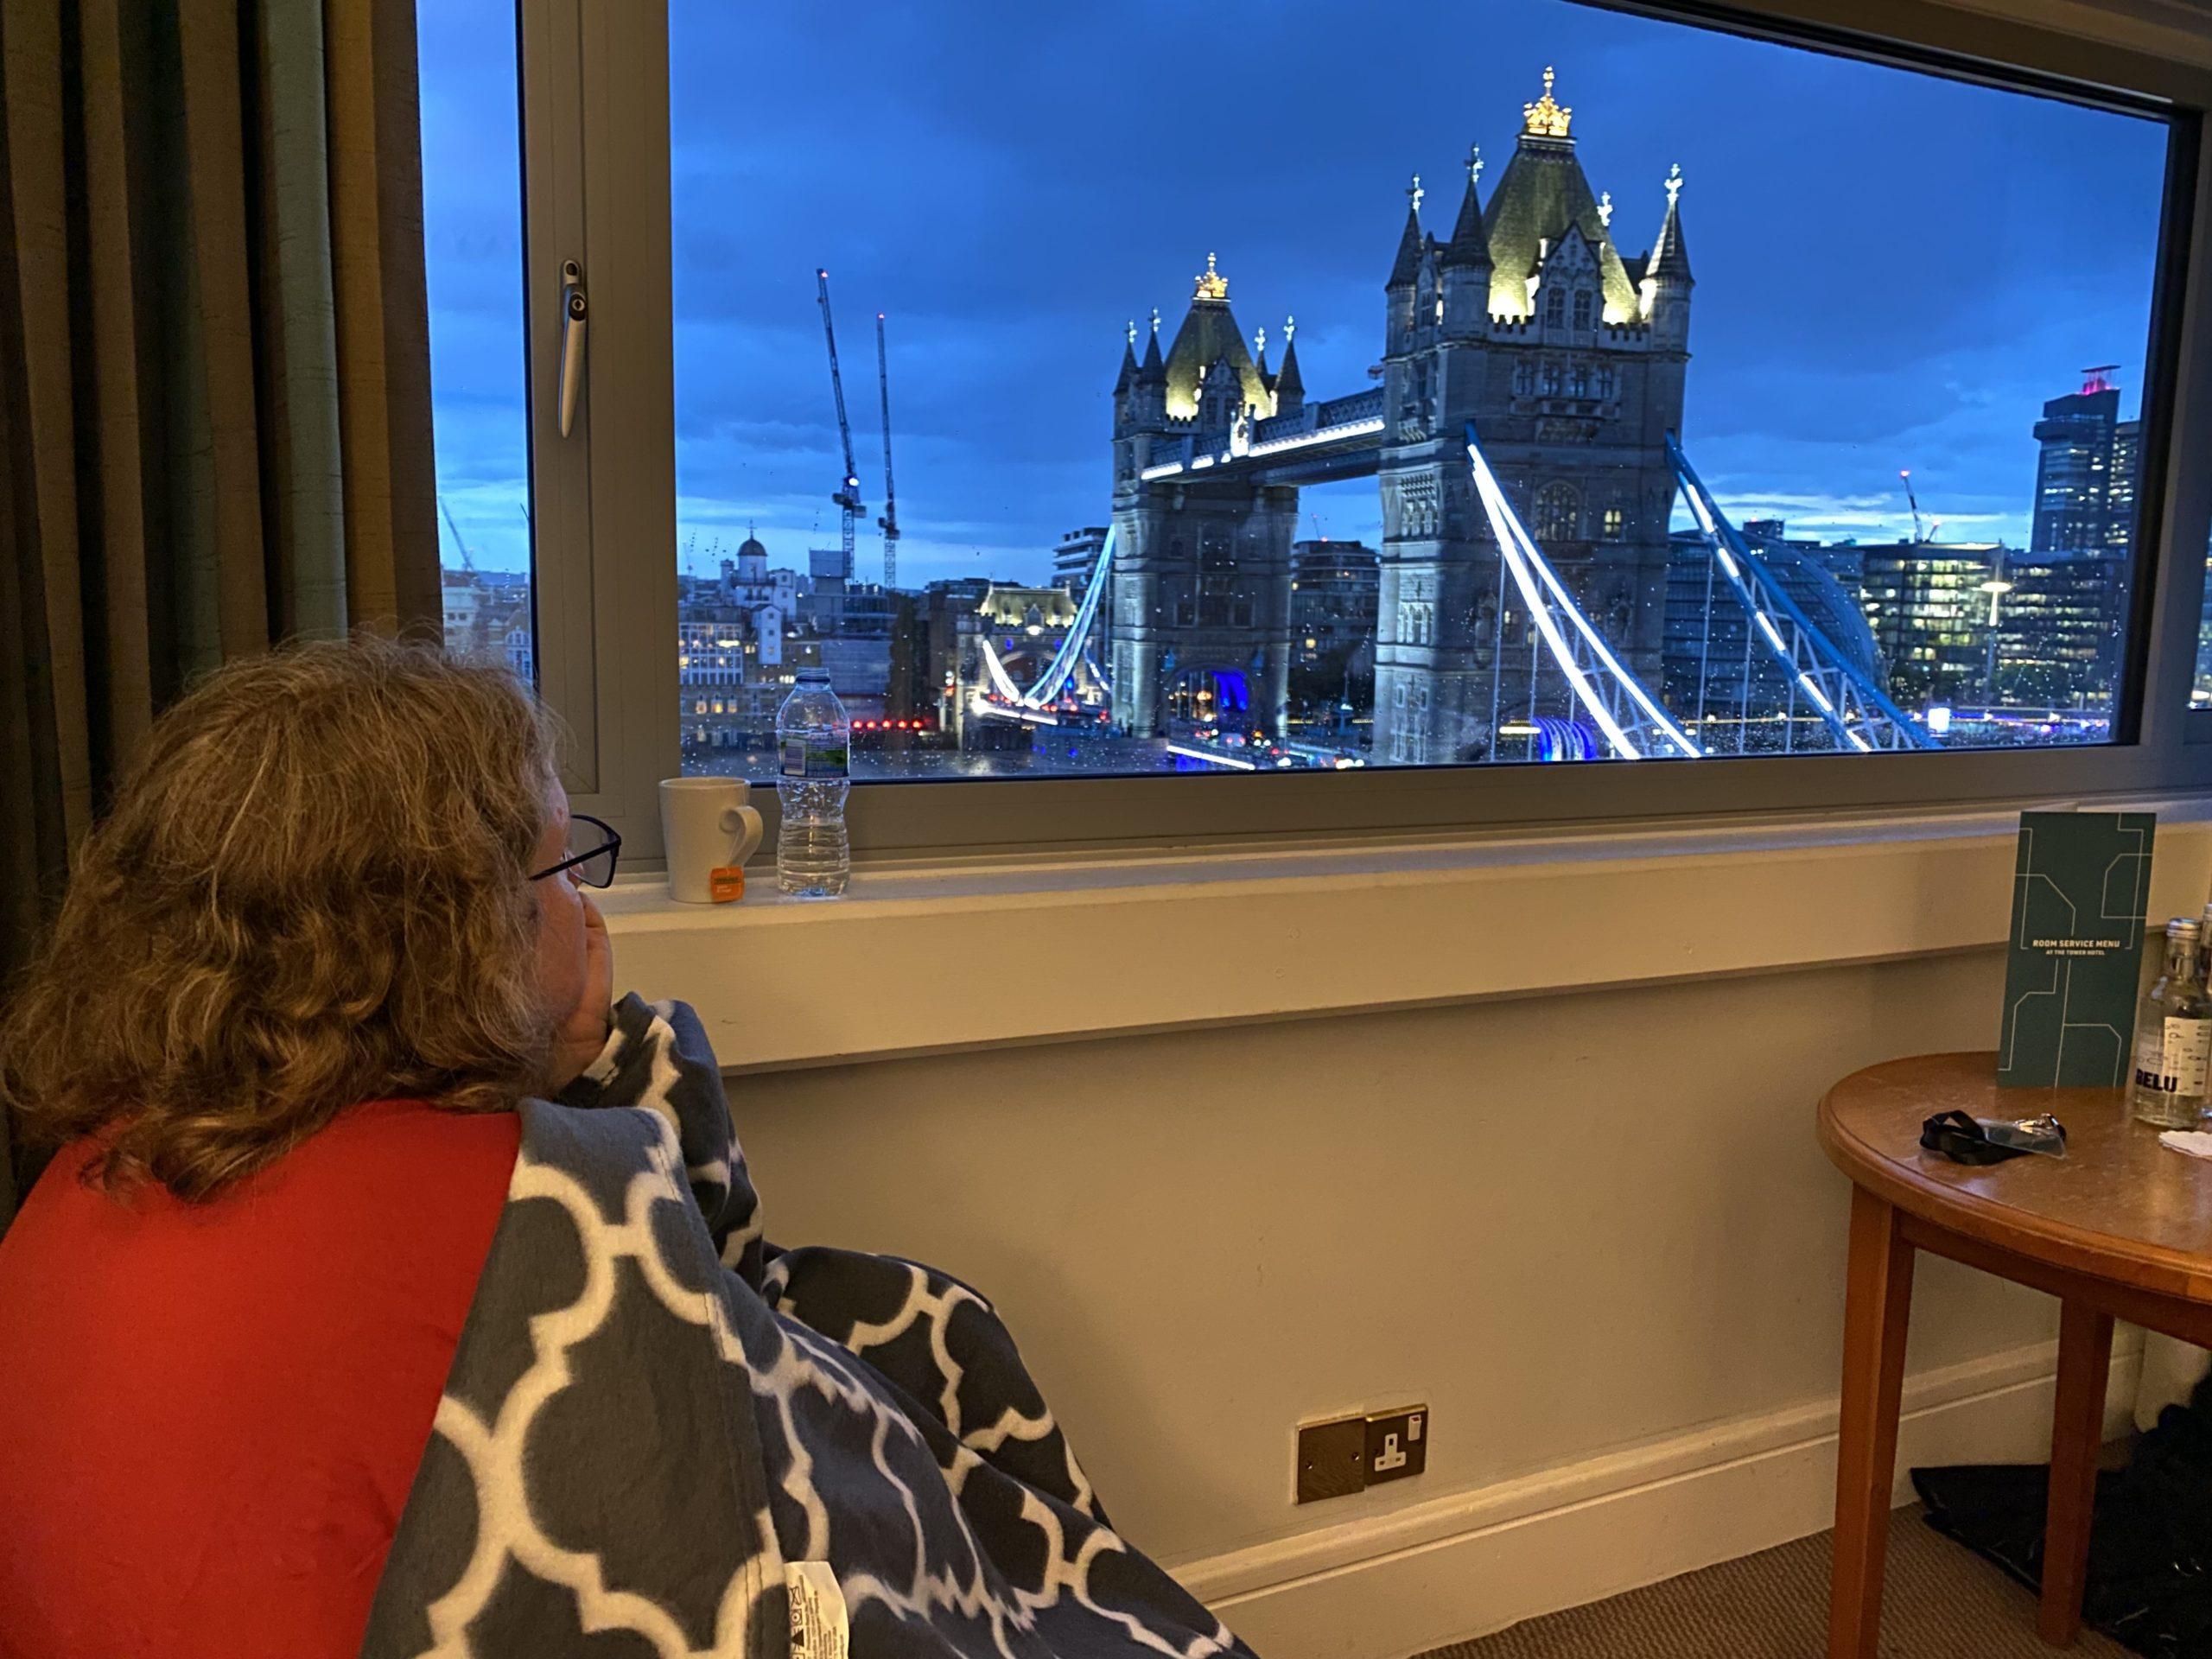 My wife curled up in a chair under a blanket, looking out the hotel winow at the Tower Bridge lit up as the sky darkens into twilight.